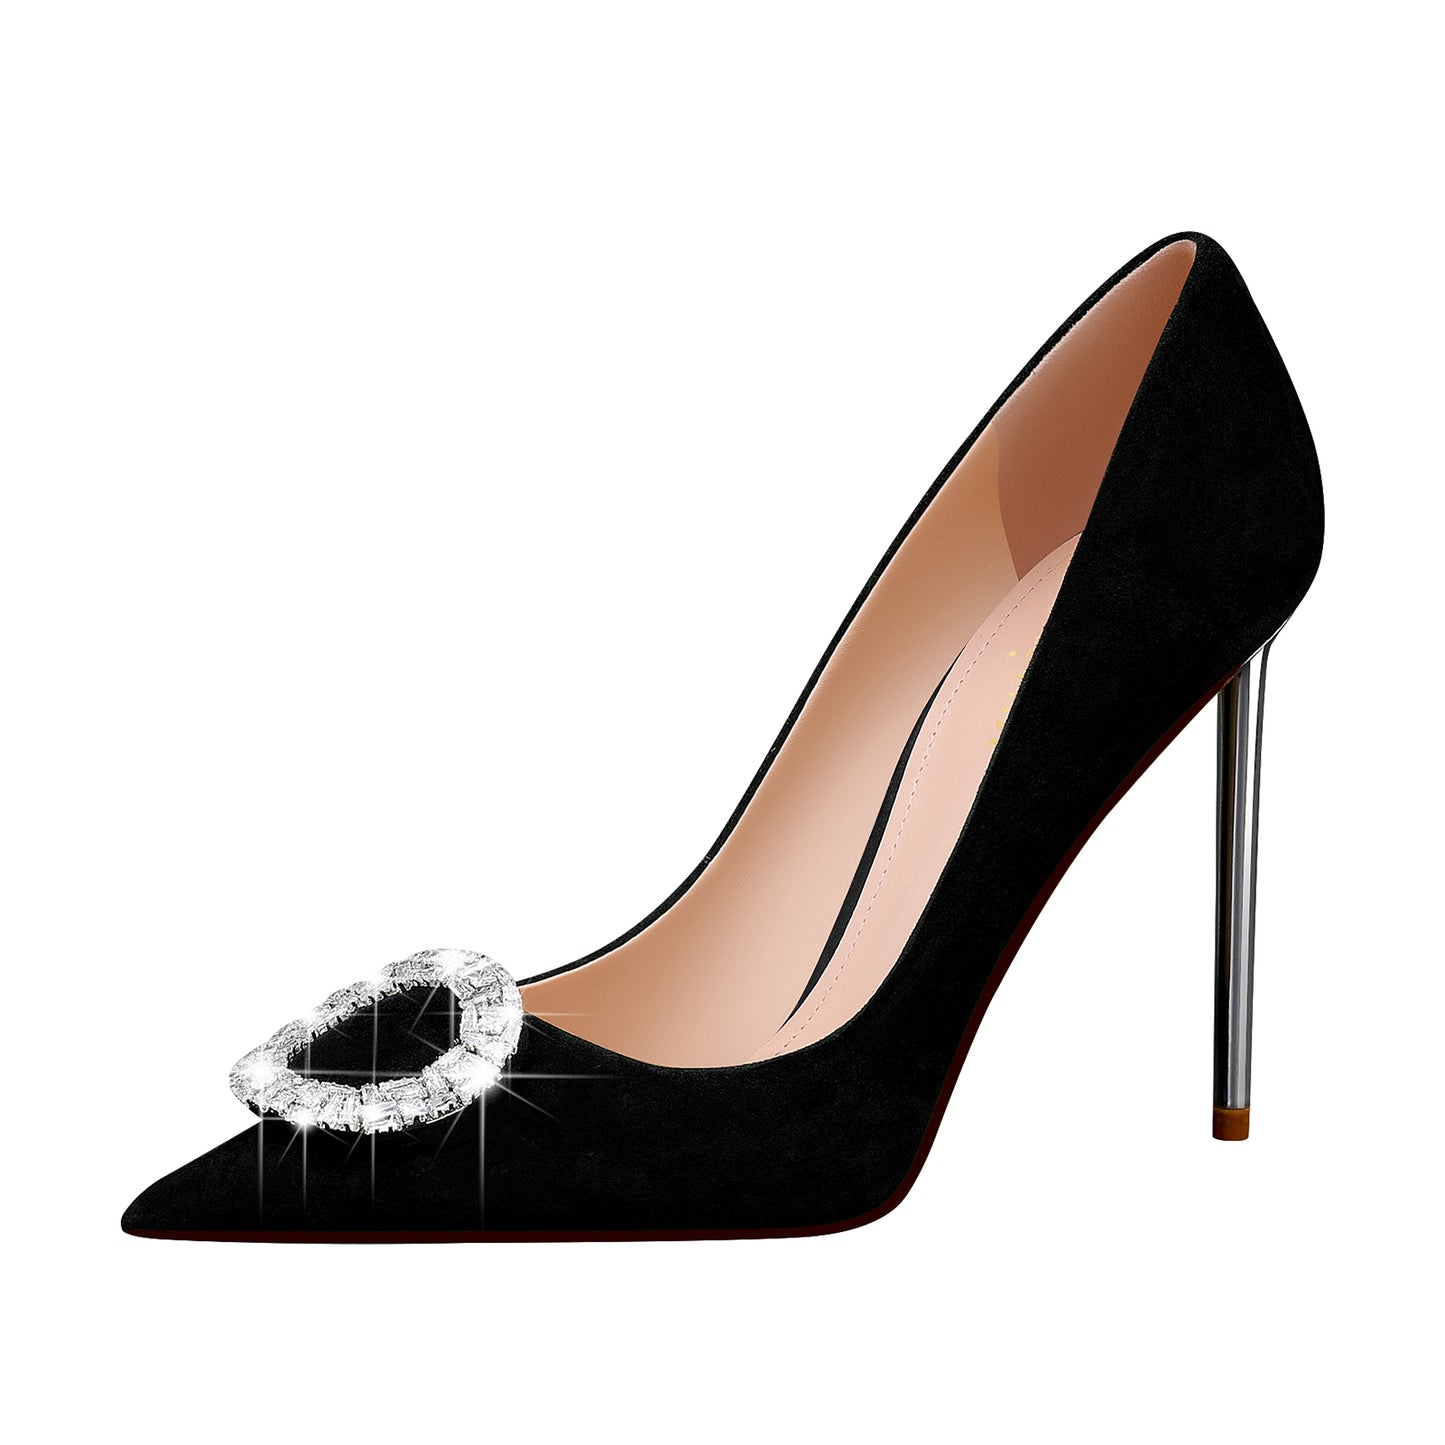 High Heels Pointed Toe Pumps Business Casual D'Orsay Suede Pointy Close Toe Pumps